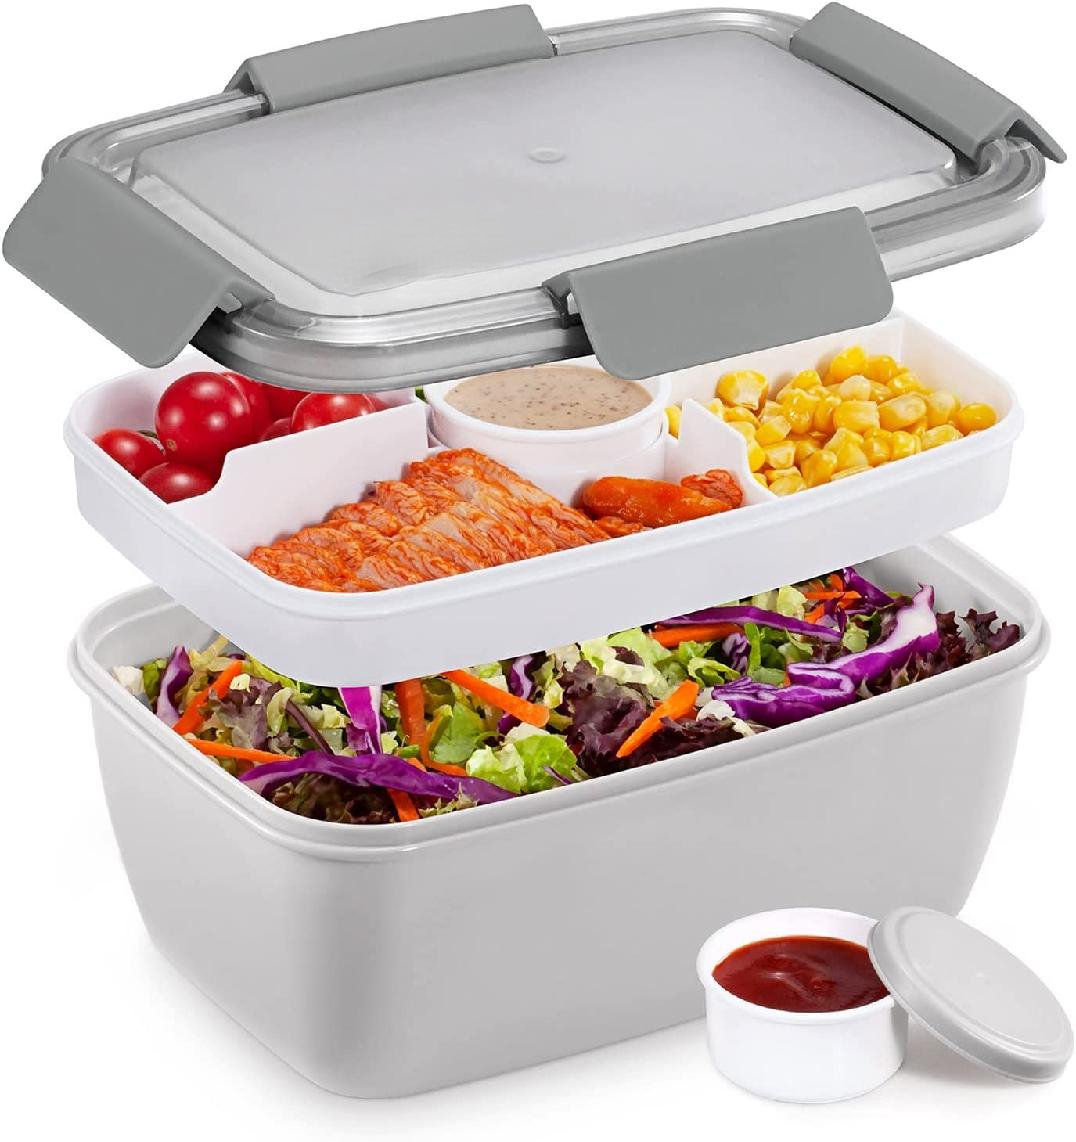 Large Salad Container for Lunch - 68 oz Salad Bowl with 5 Compartments Bento-Style Tray, 2 Pieces Salad Dressing Containers to Go, Leak-Proof & BPA-Fr